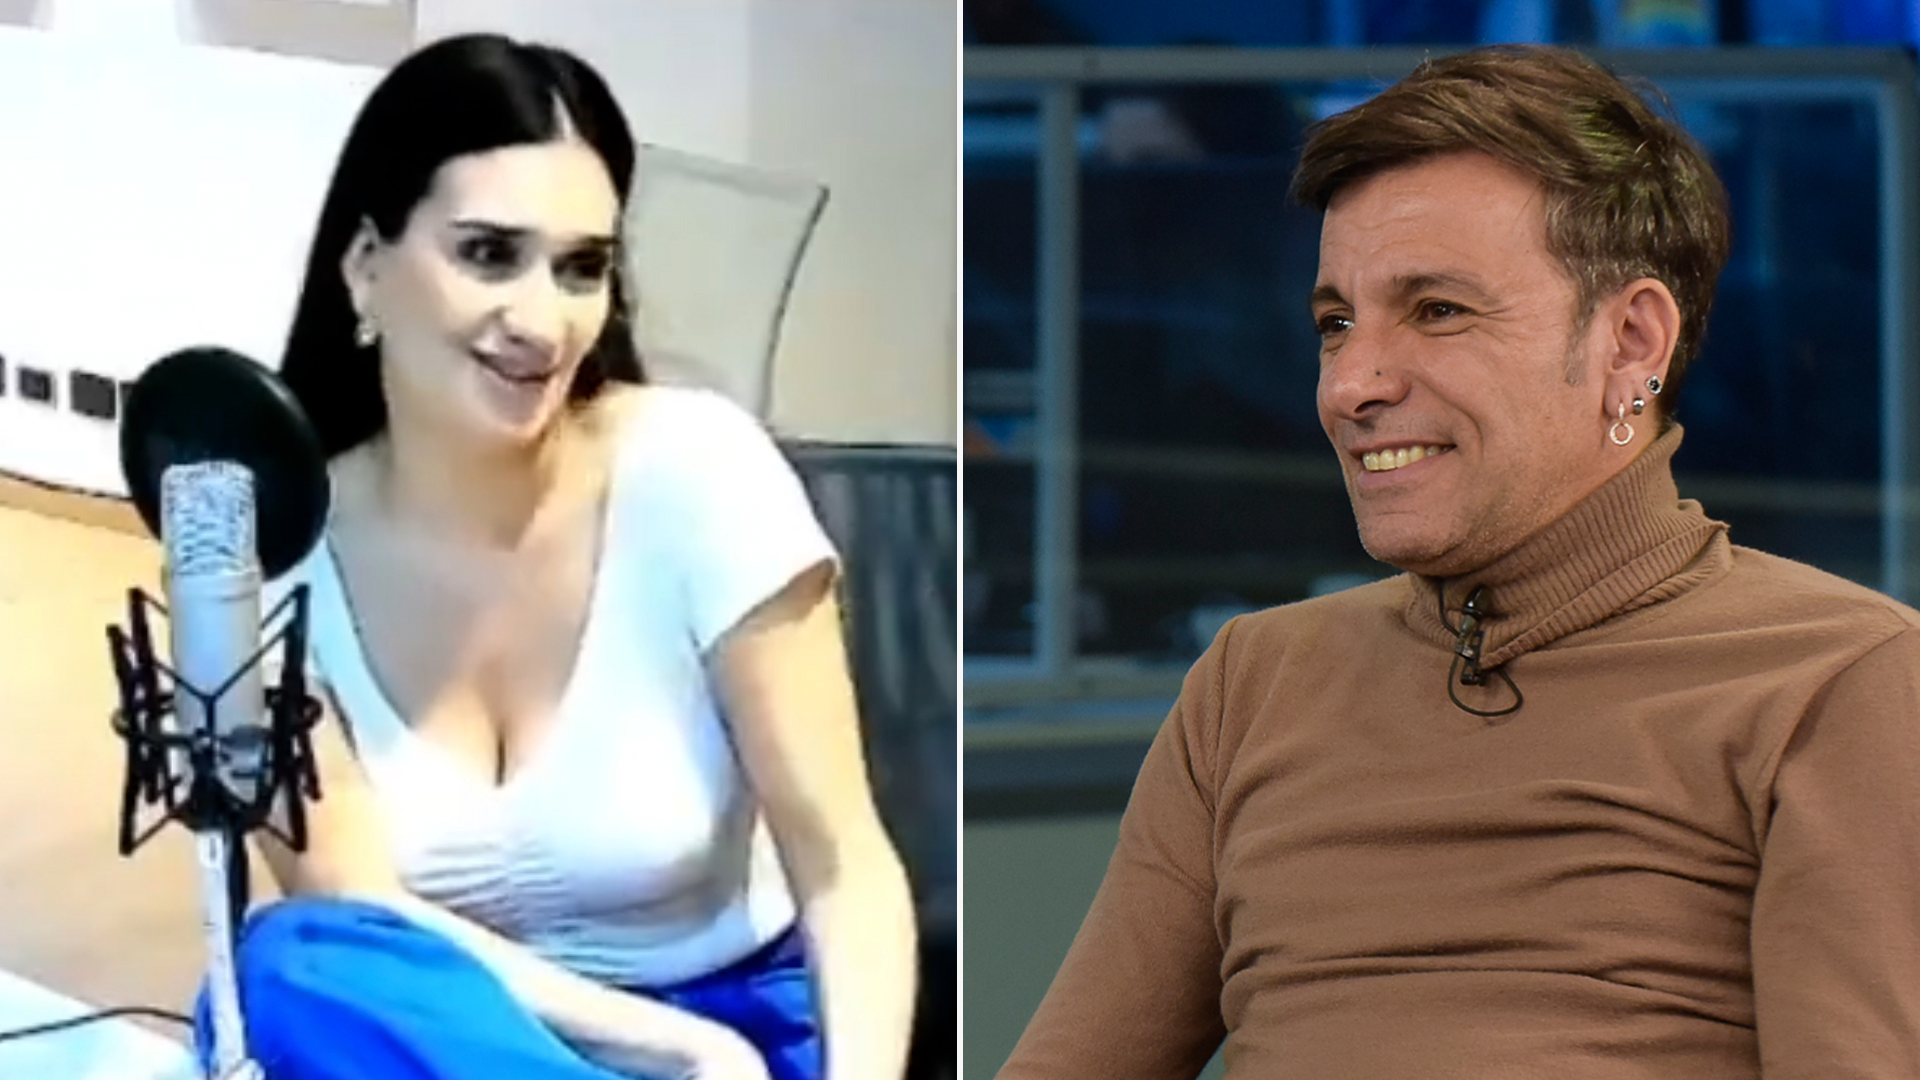 Momi Giardina and Martin Bossi were a couple for four years